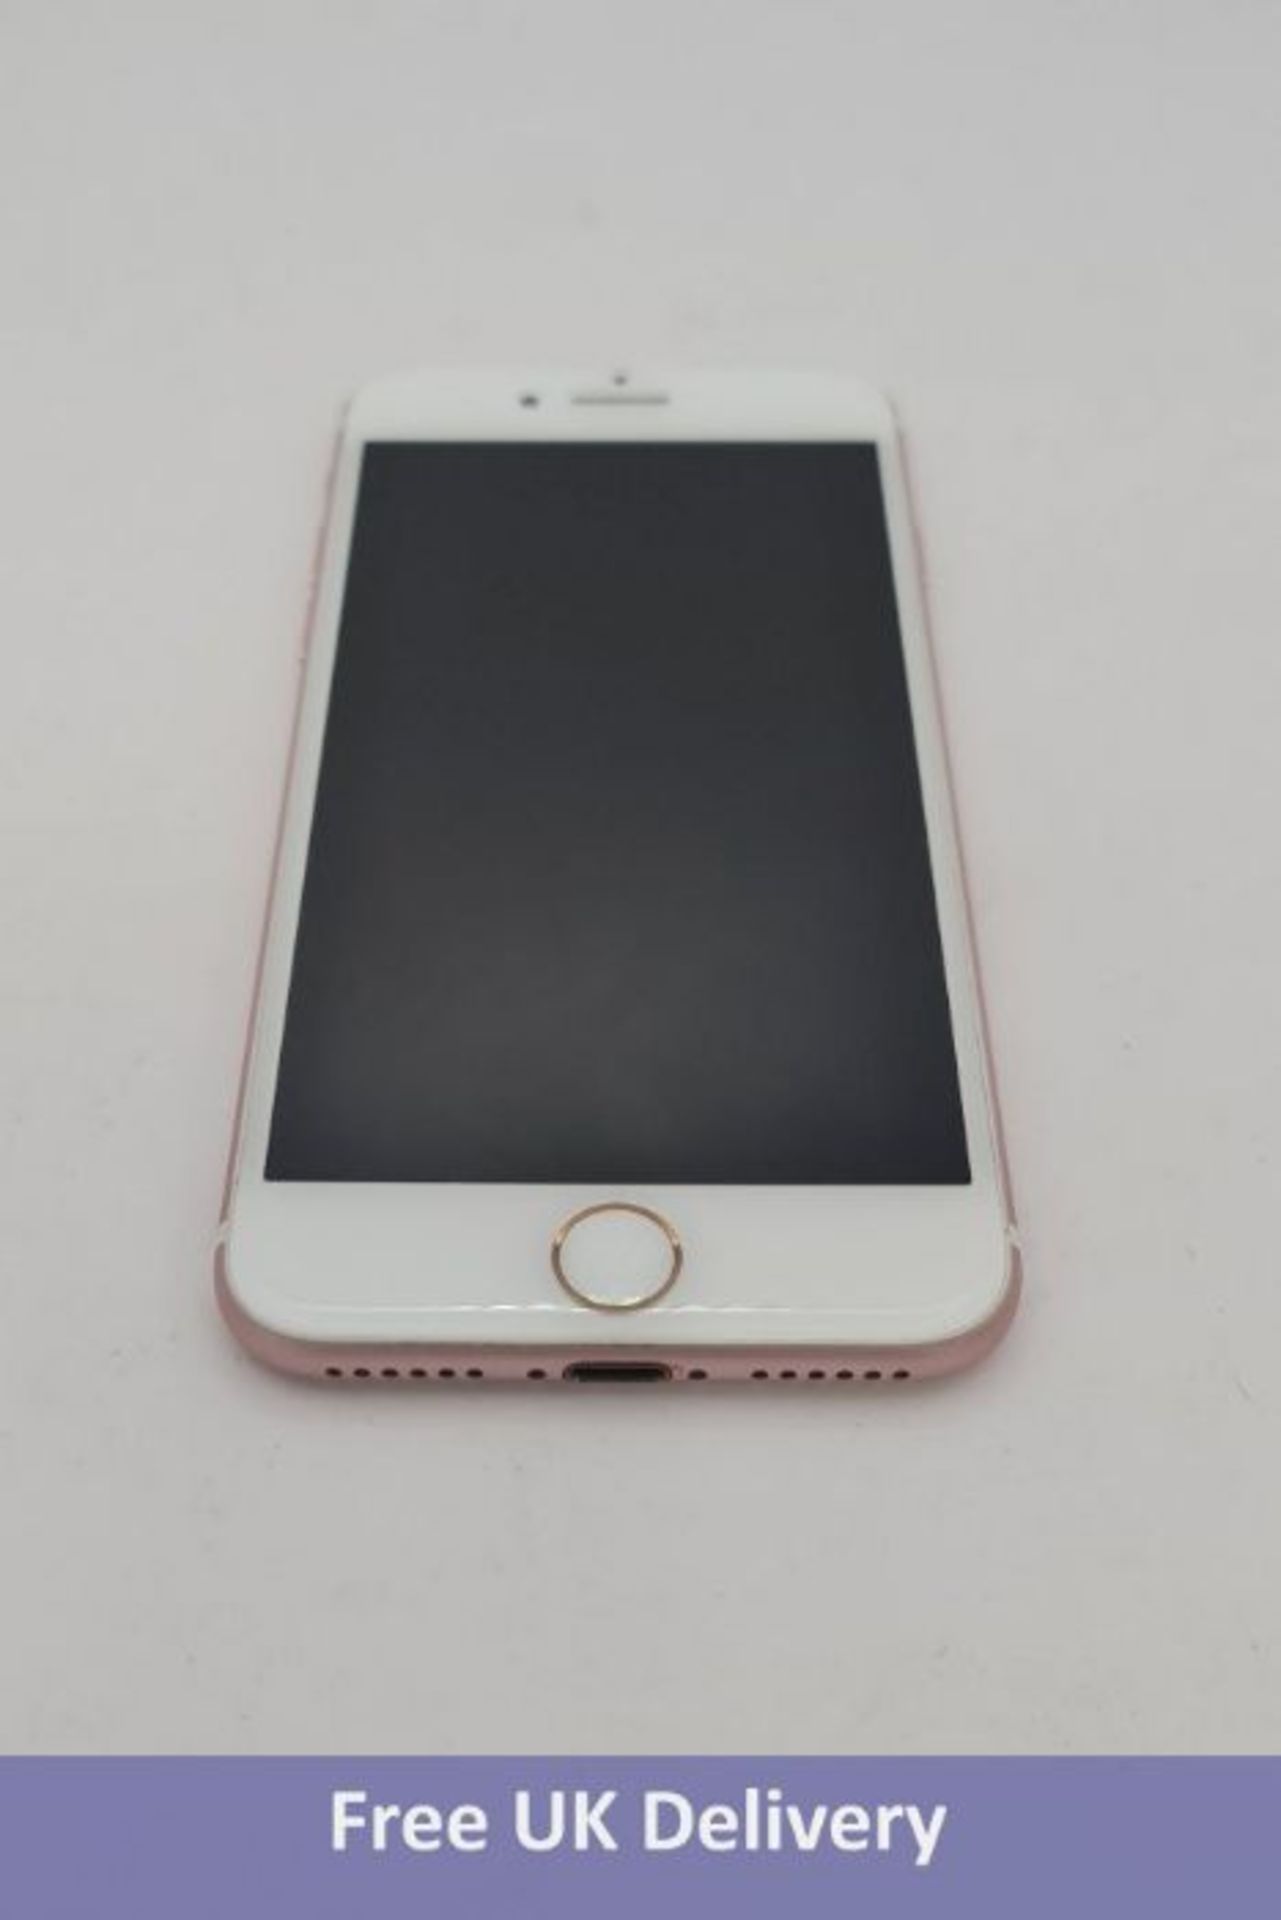 Apple iPhone 7 128GB Rose Gold, MN952QL/A, Three network. Used, no box or accessories. Checkmend cle